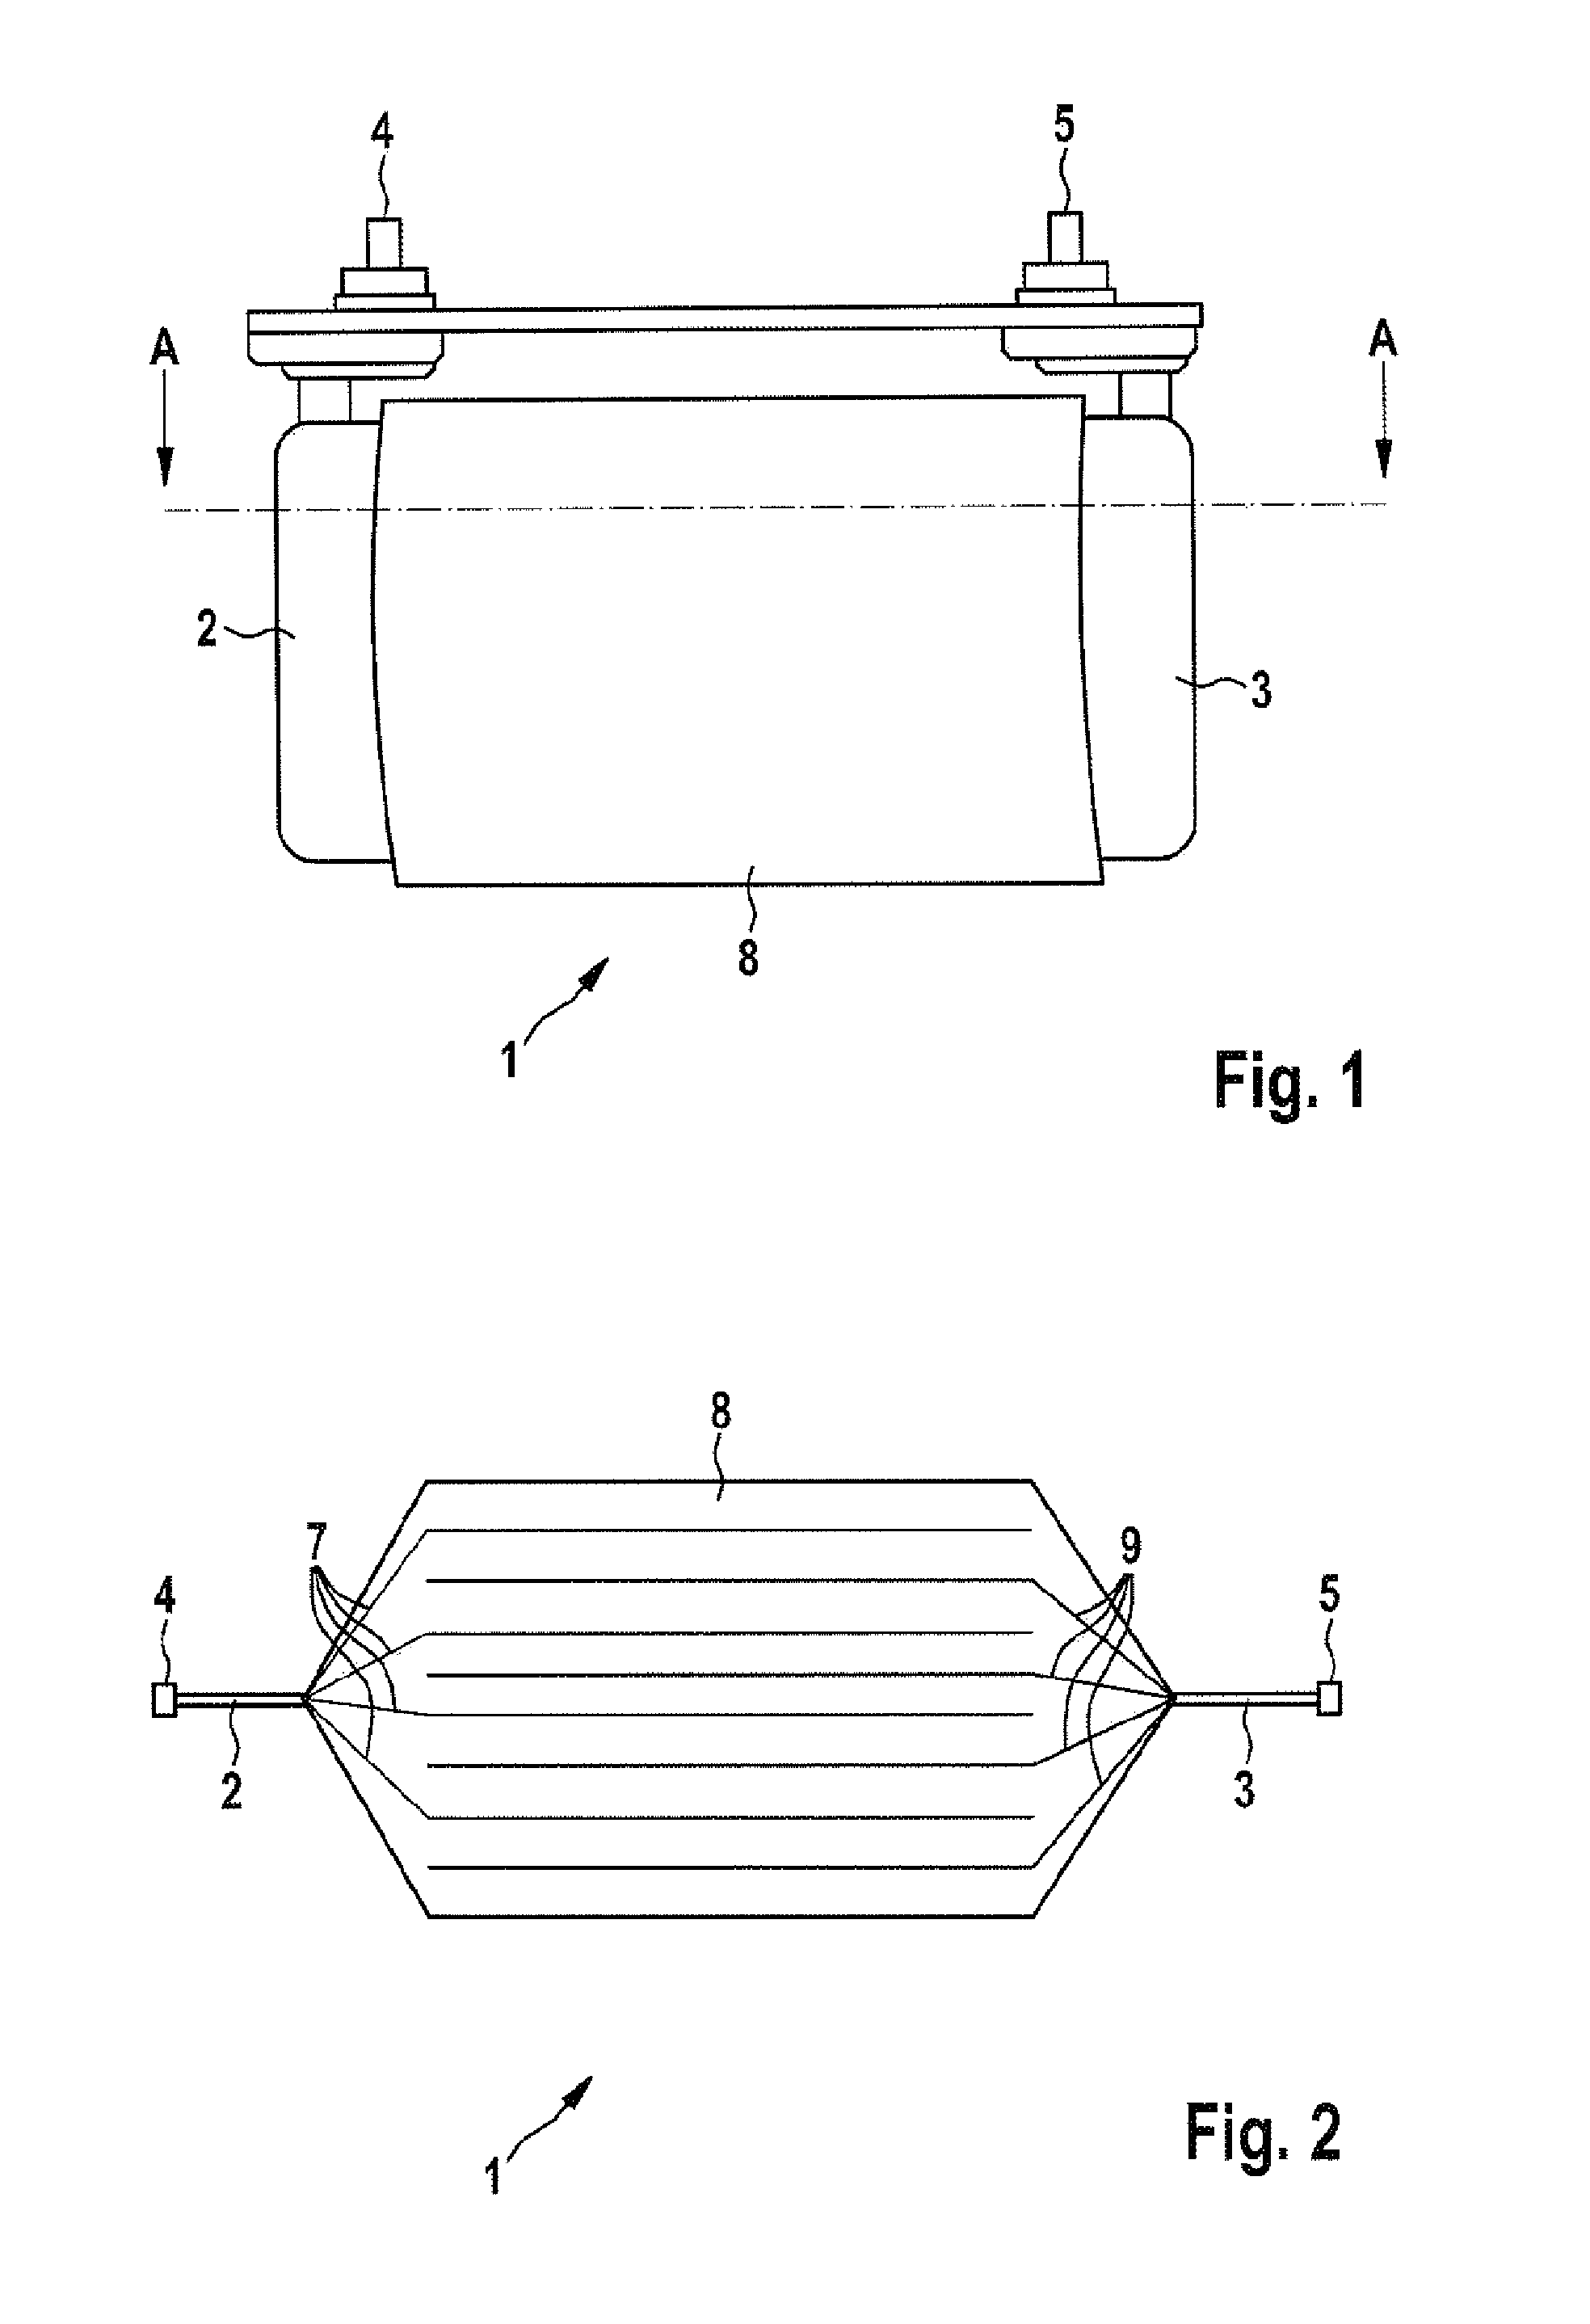 Short-circuit detection apparatus for detecting short circuits of a battery cell and method for short-circuit detection